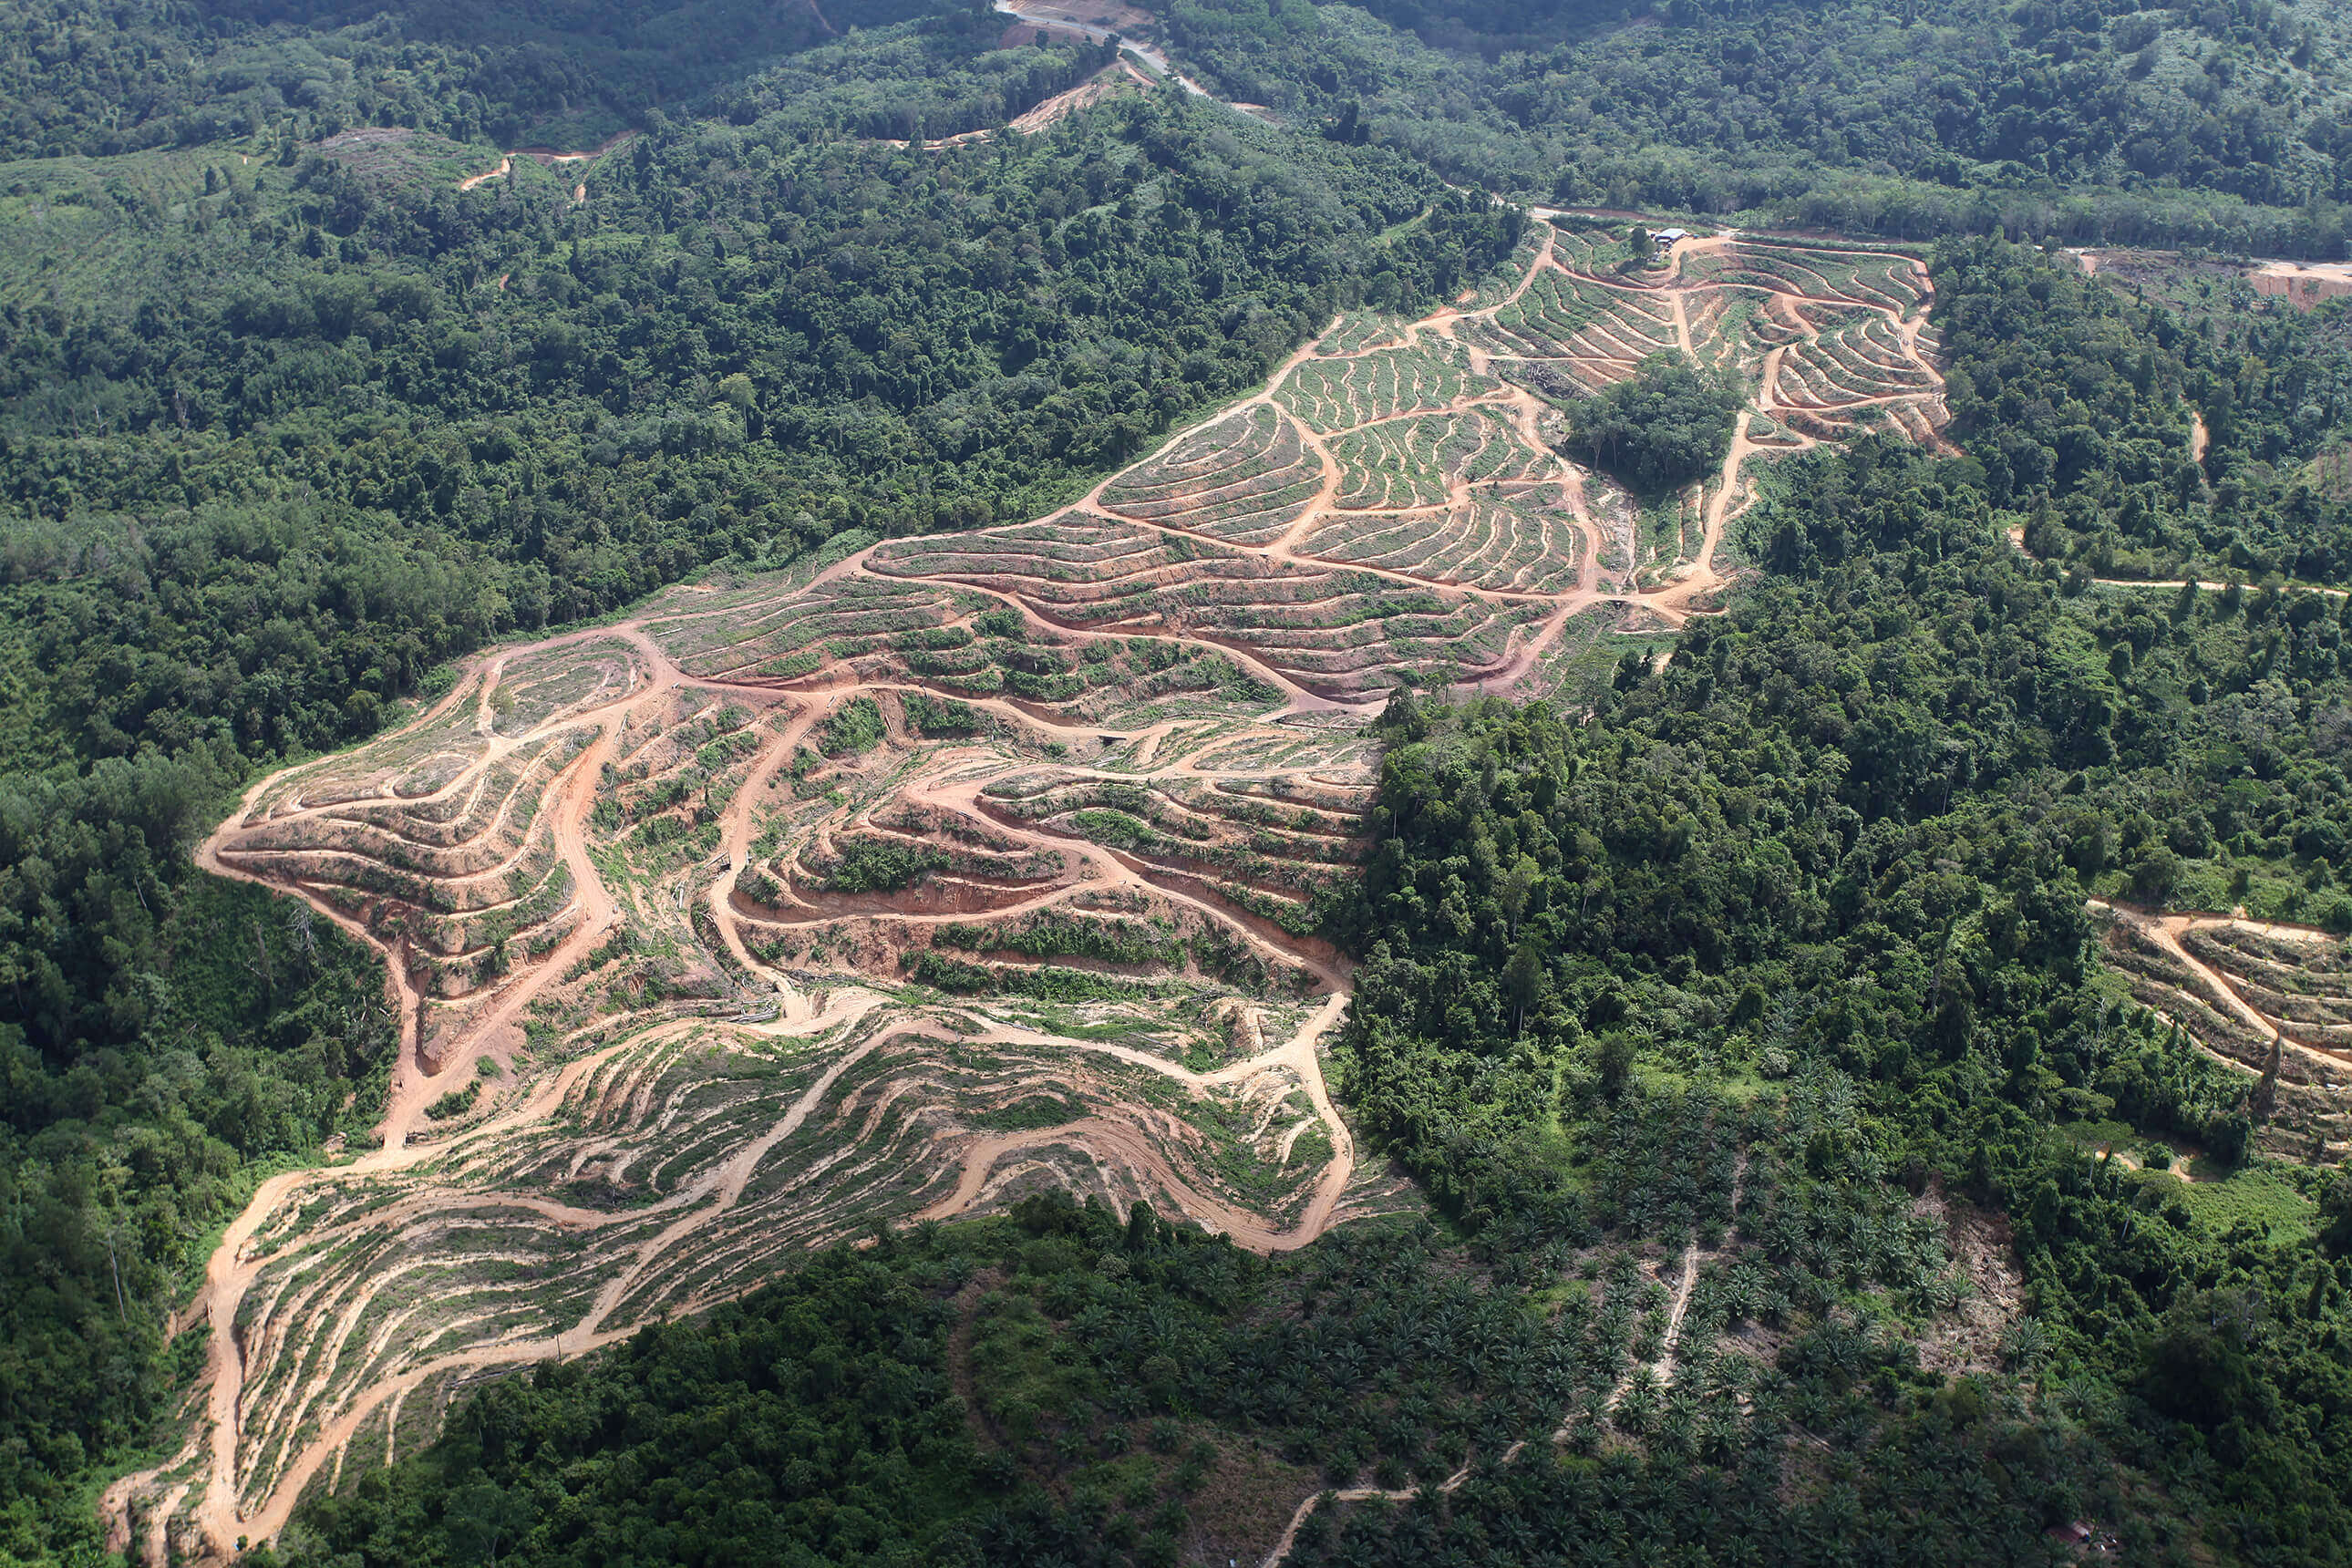 A Purdue University analysis shows that U.S. biofuel production and policy may account for only a negligible portion of the land cleared for increased palm oil production since the 1990s. (Photo courtesy mongabay.com).